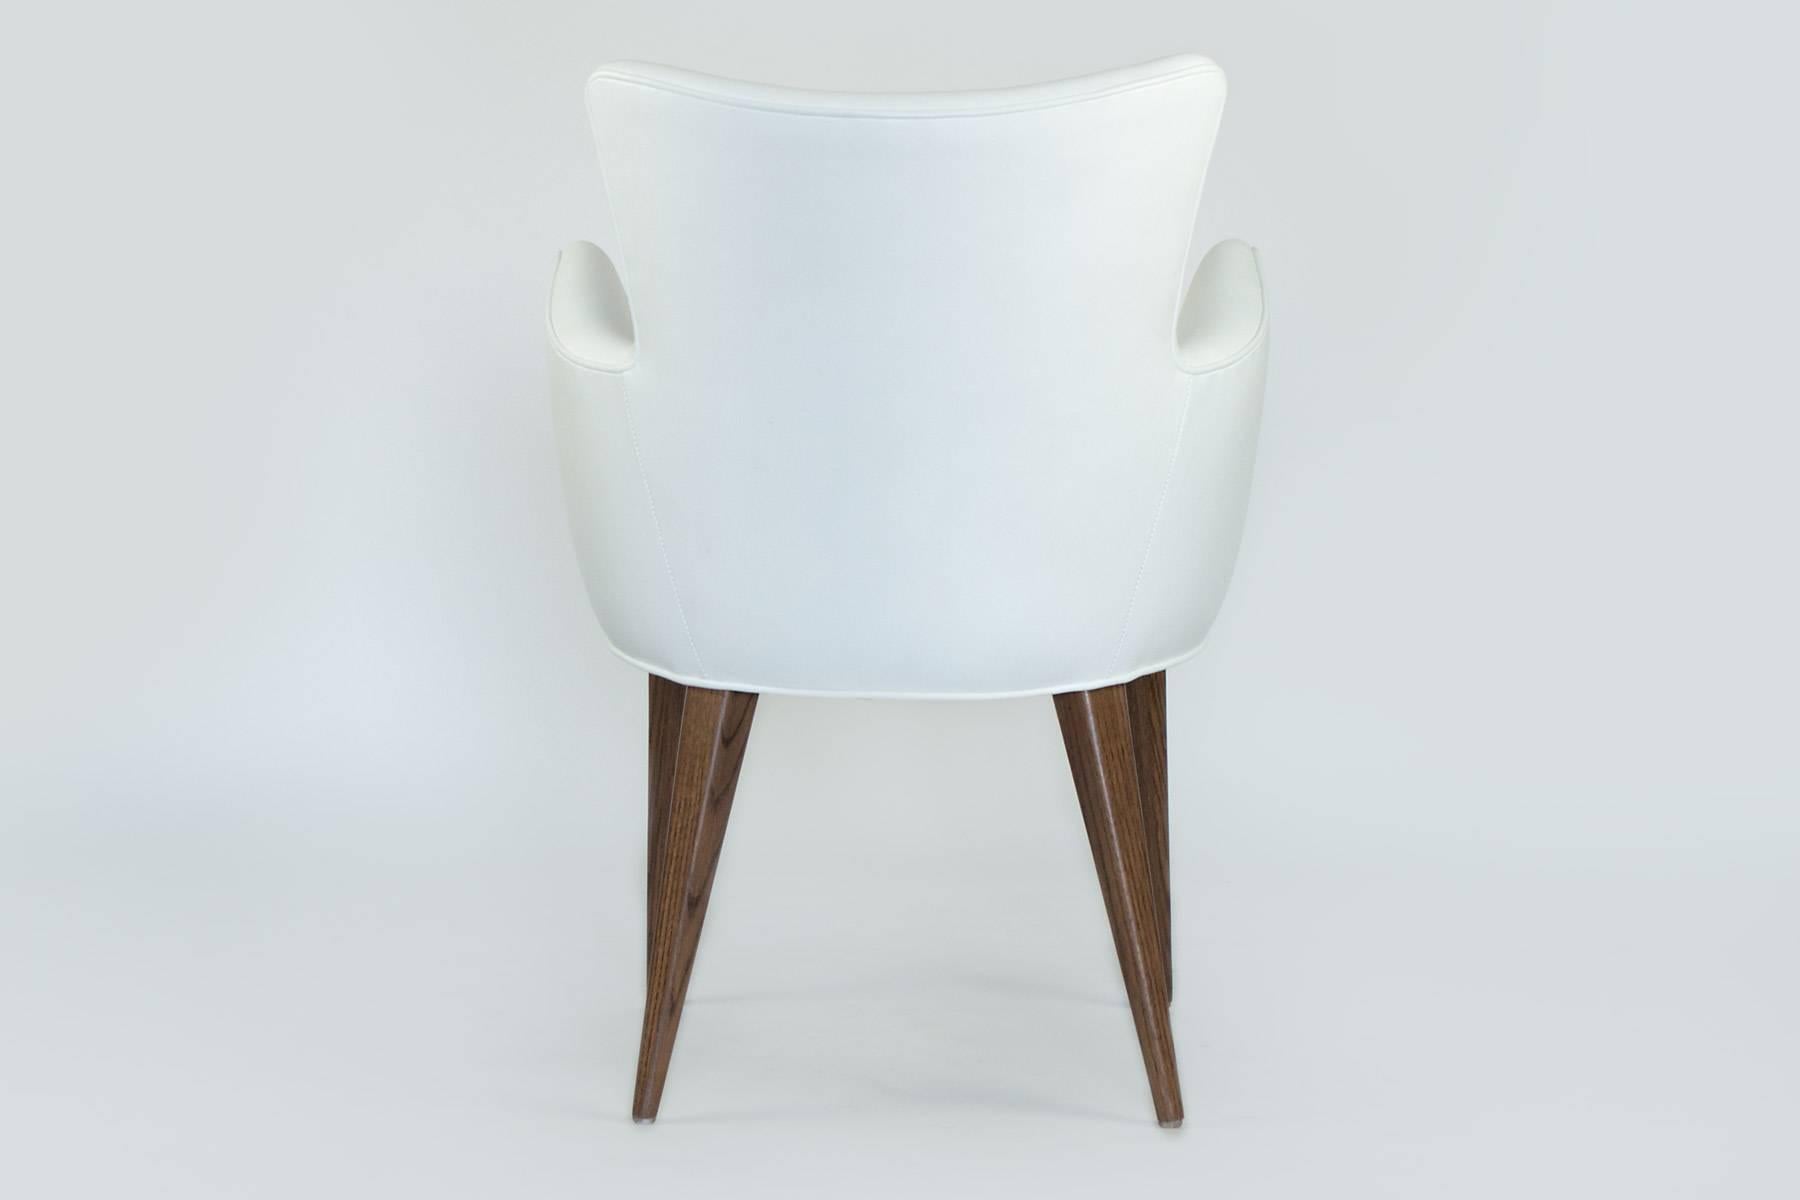 This stylish chair can stand alone as a side chair or is perfect in the dining room. It has modern lines, but the oak legs will sit well with any wood furnishings. The curved frame hugs you comfortably with the armrest being at a perfect height.